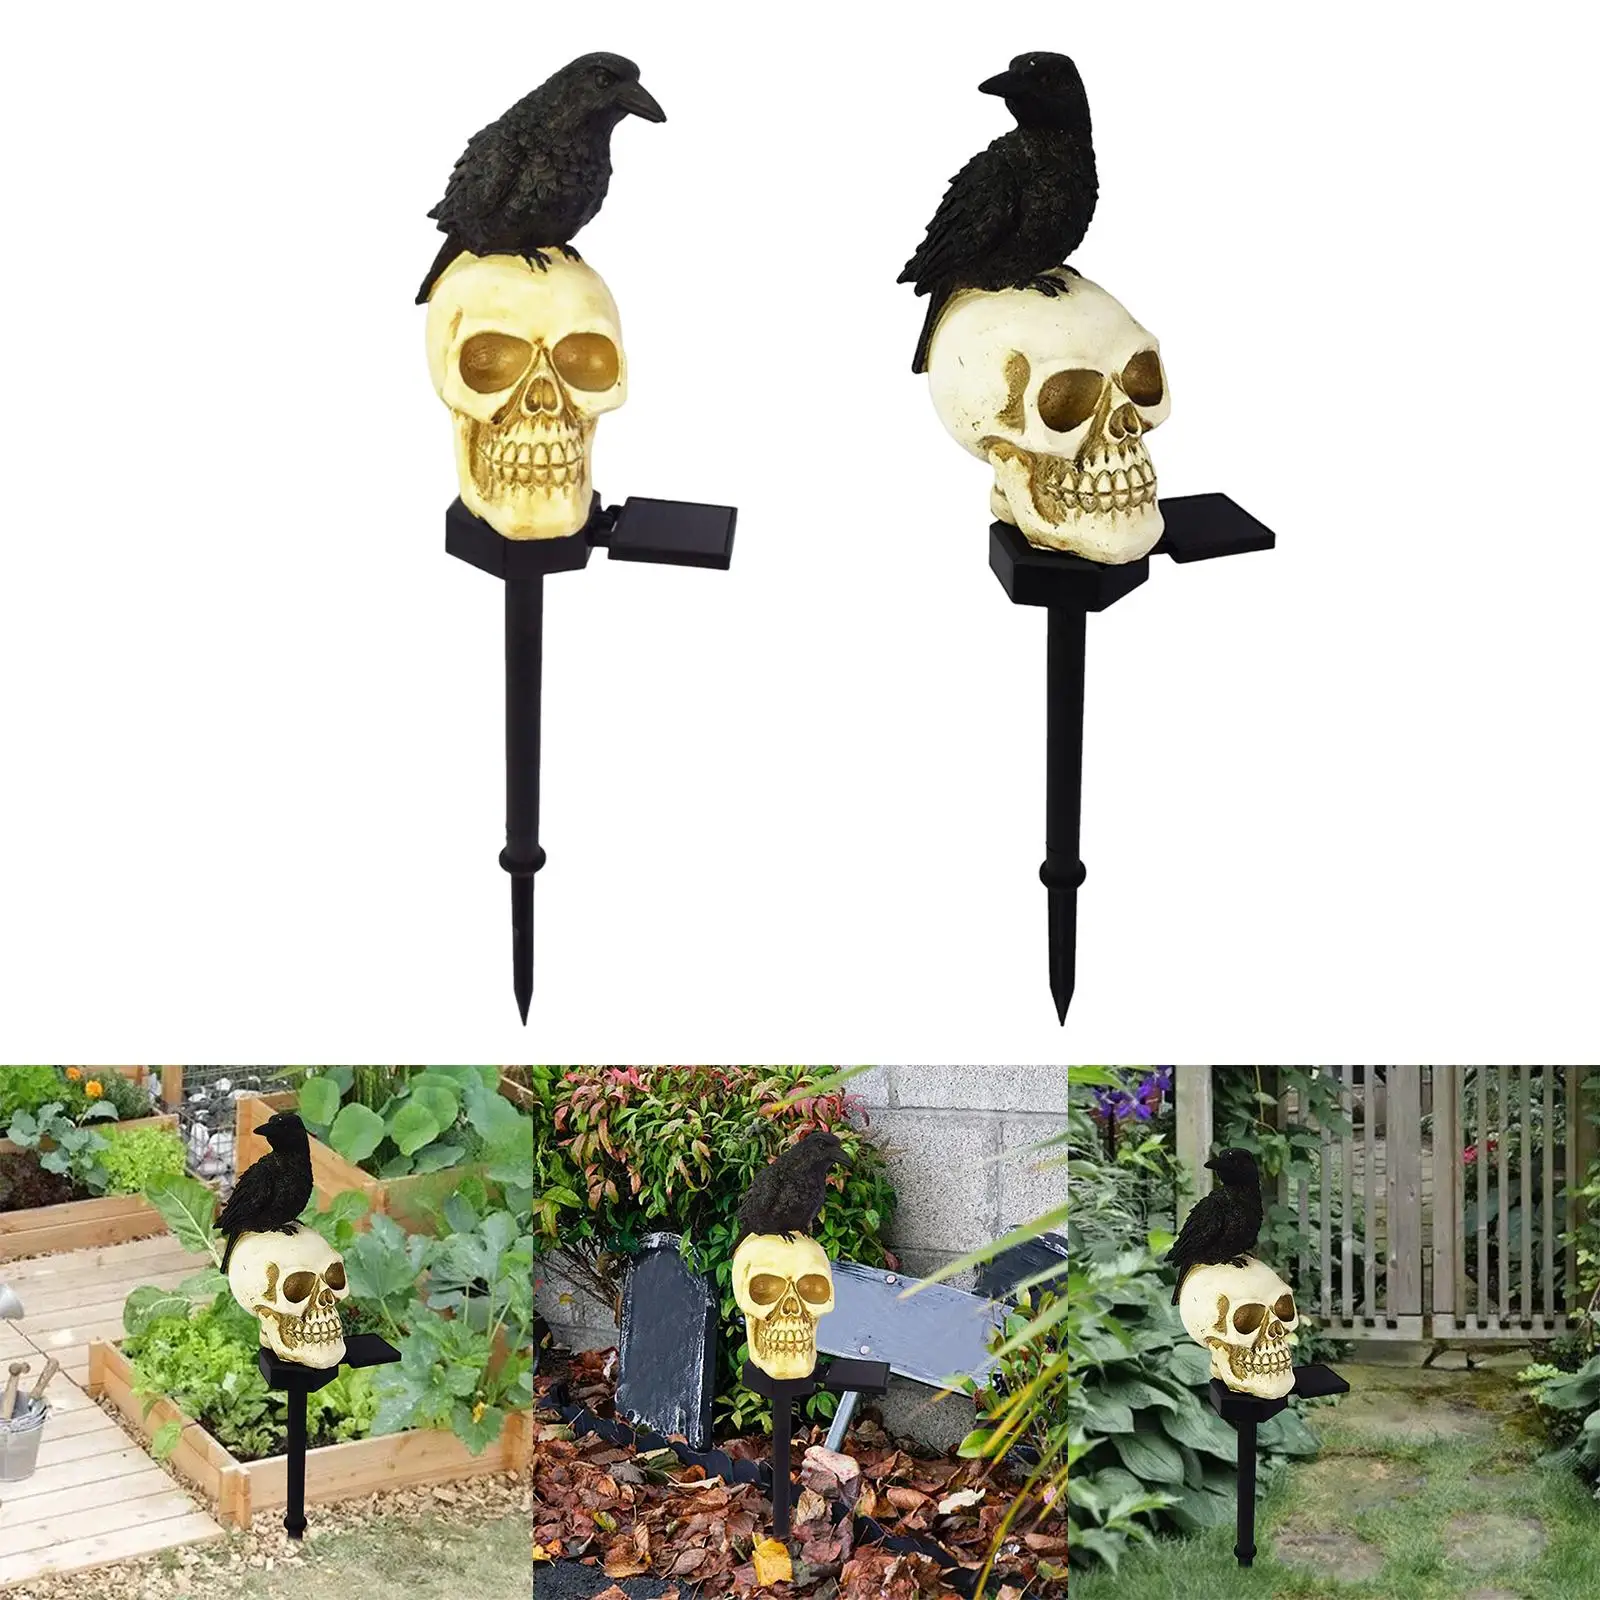 Novelty Garden Light IP45 Waterproof with Stake Night Lamp Stake Light Path Lighting for Halloween Pathway Lawn Patio Decoration